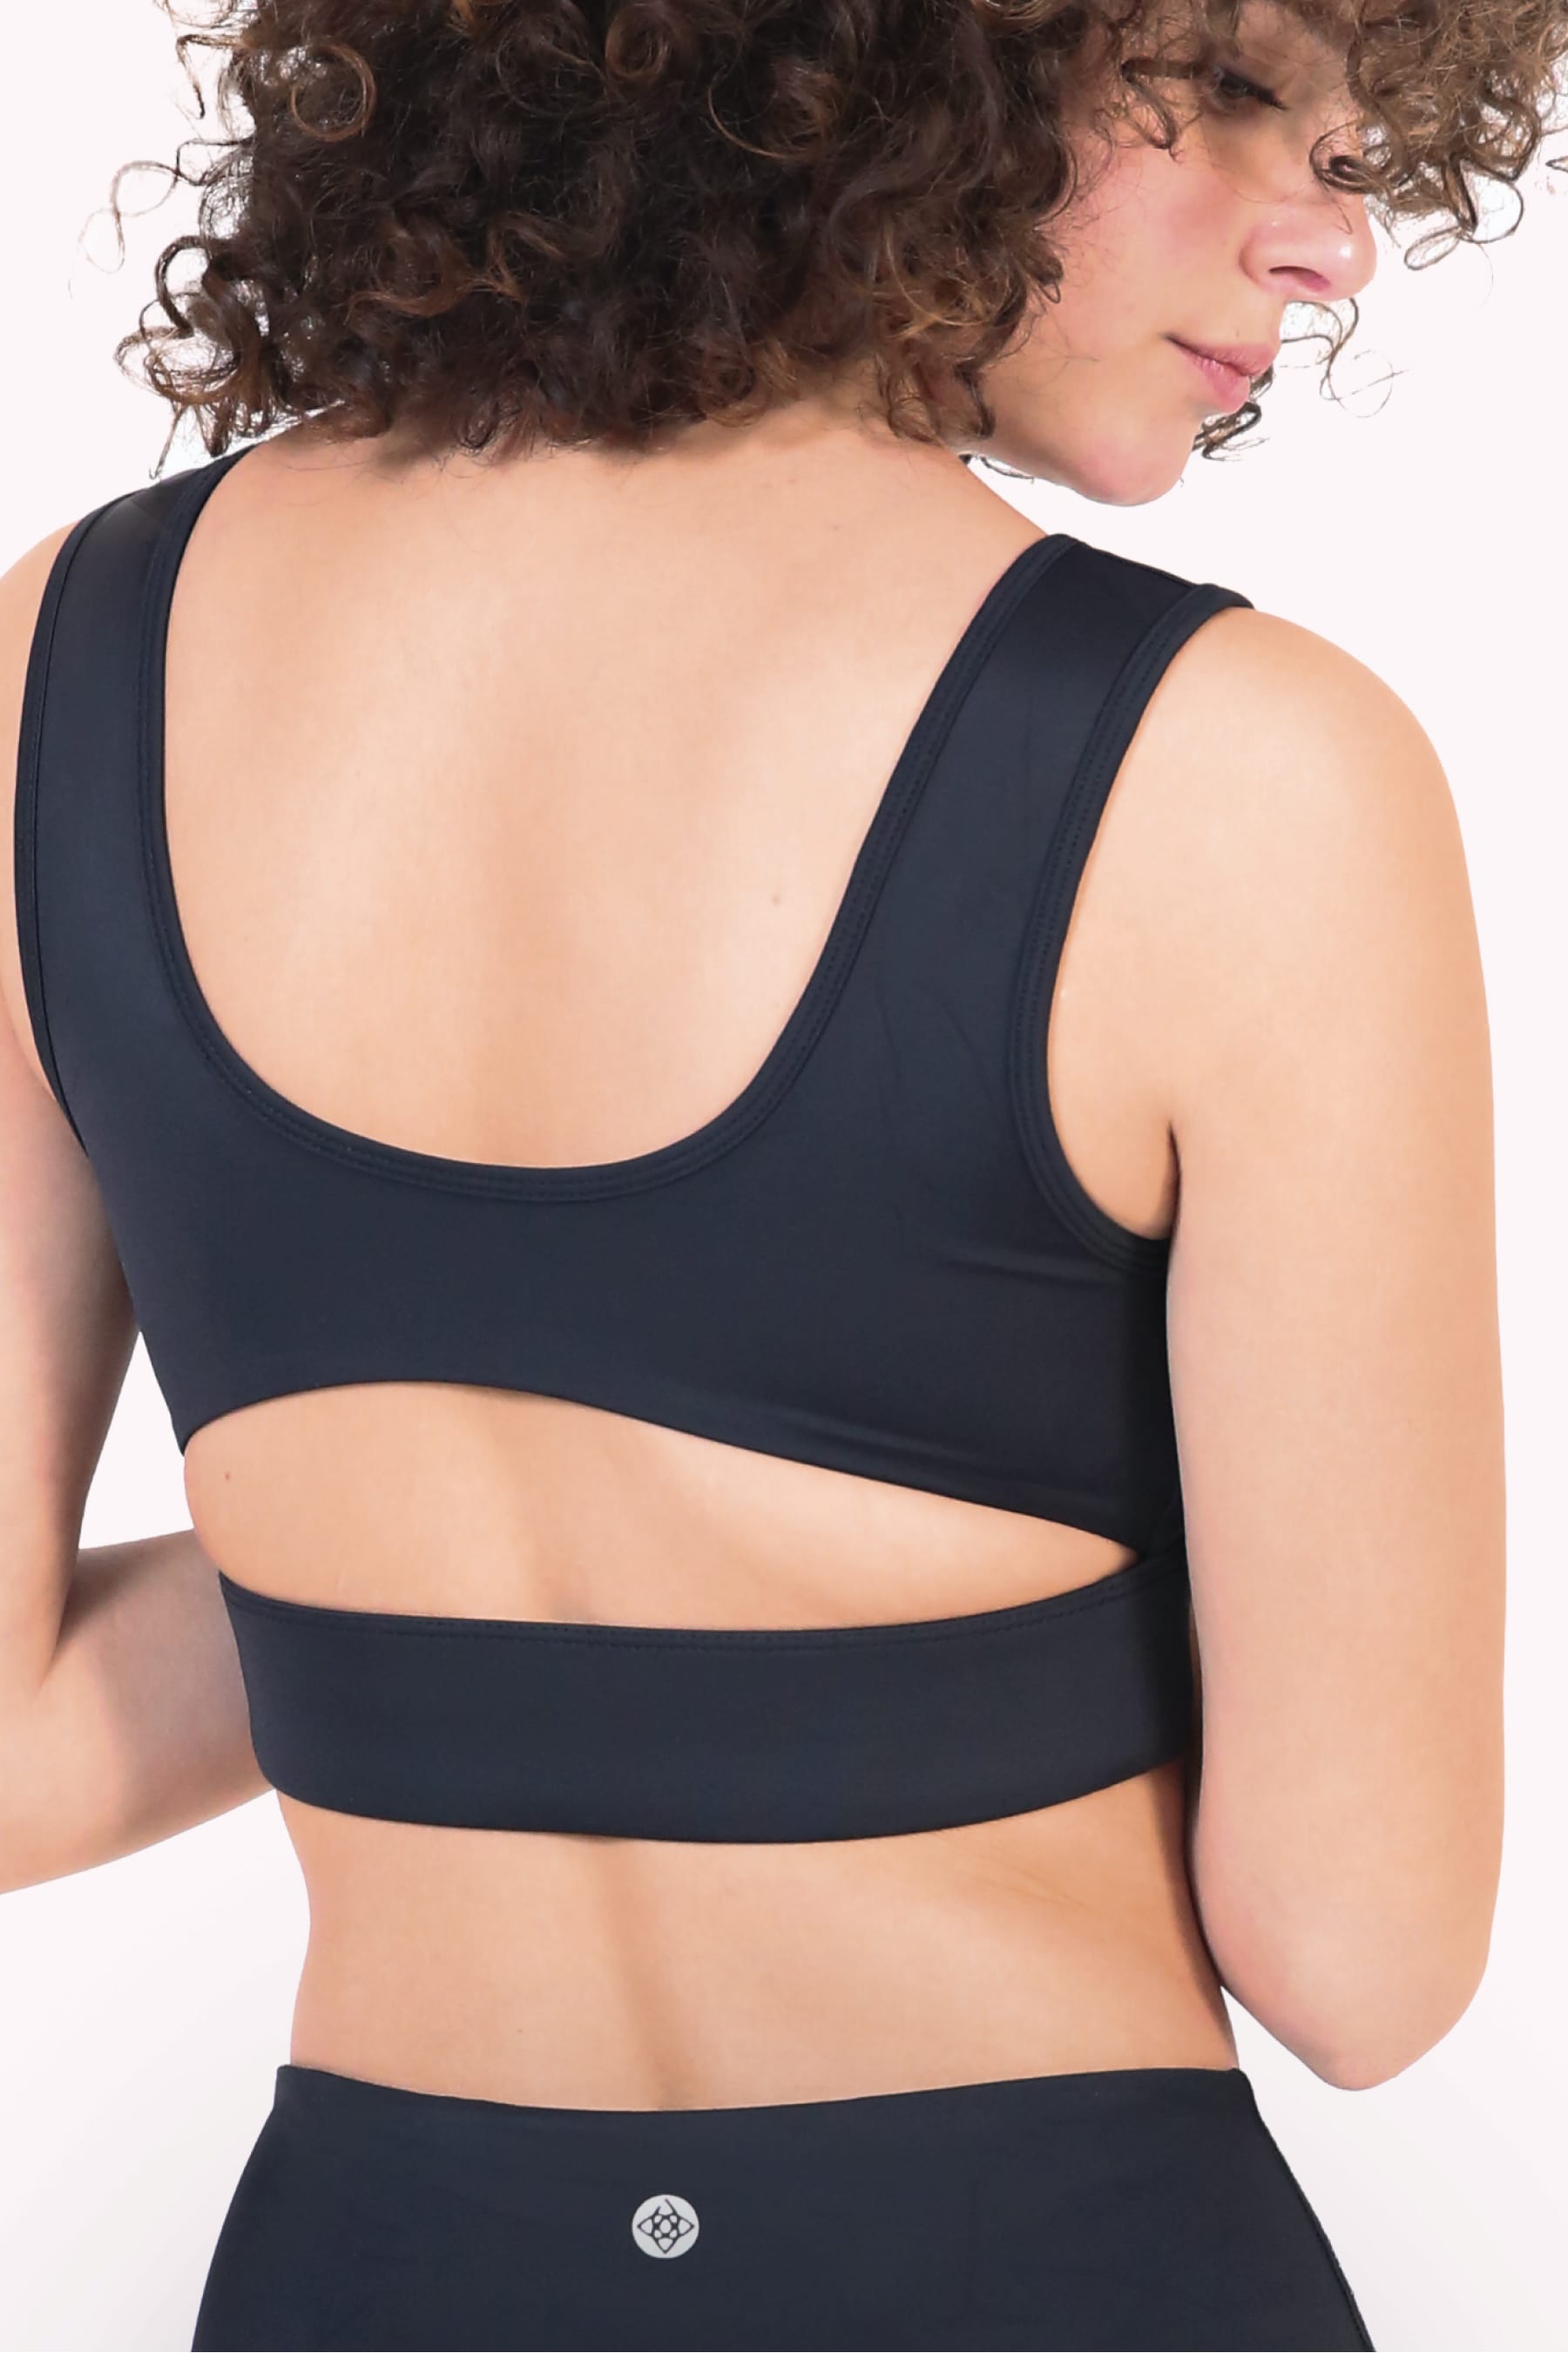 Alcoholic sports bras are now a thing! And just in time for summer - Heart